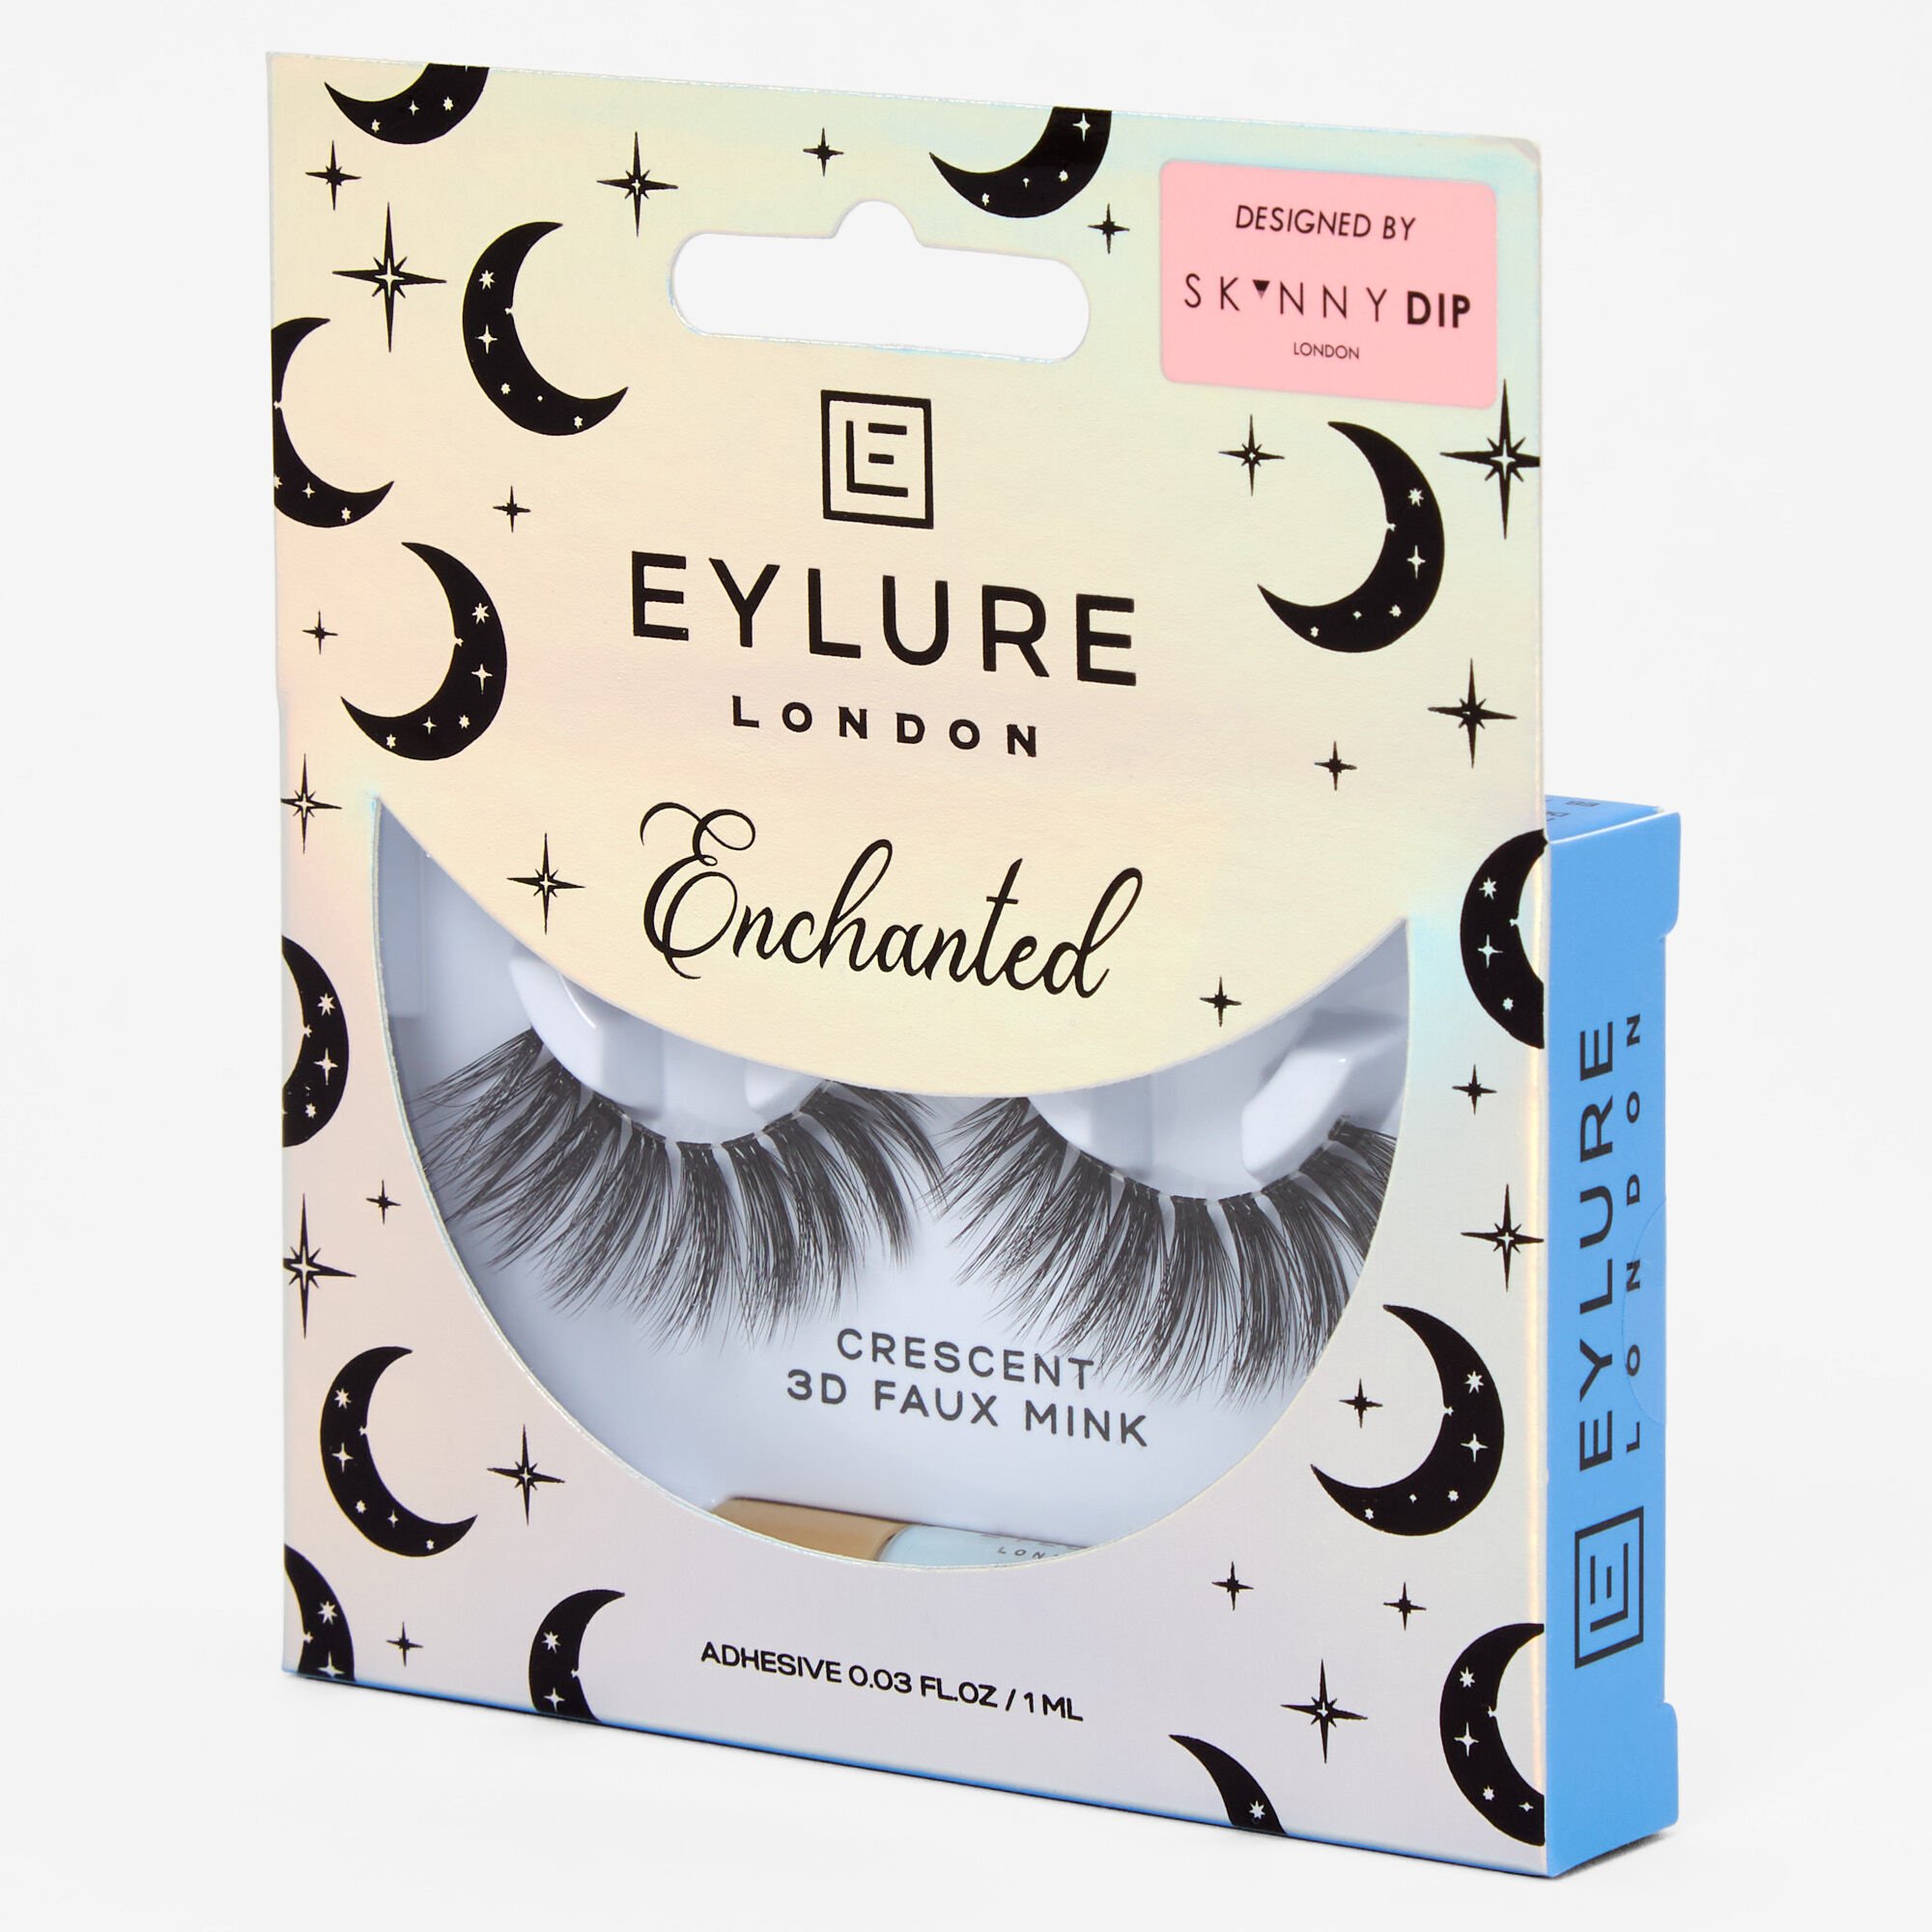 View Claires Eylure X Skinnydip Enchanted Faux Mink Eyelashes Crescent Black information